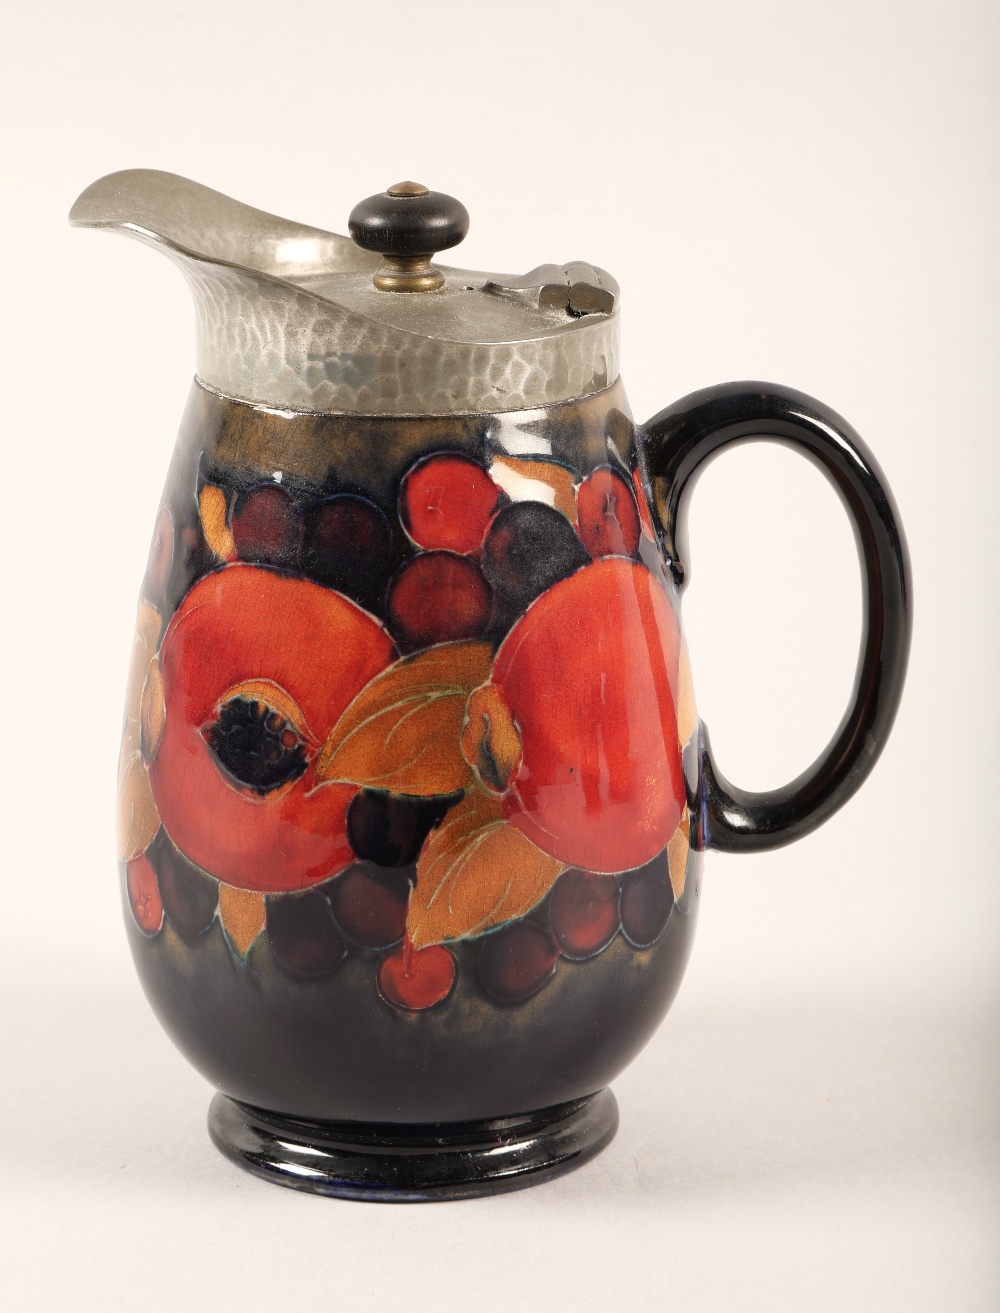 Moorcroft pottery Tudric pewter three piece tea service, pomegranate pattern designed by William - Image 4 of 22